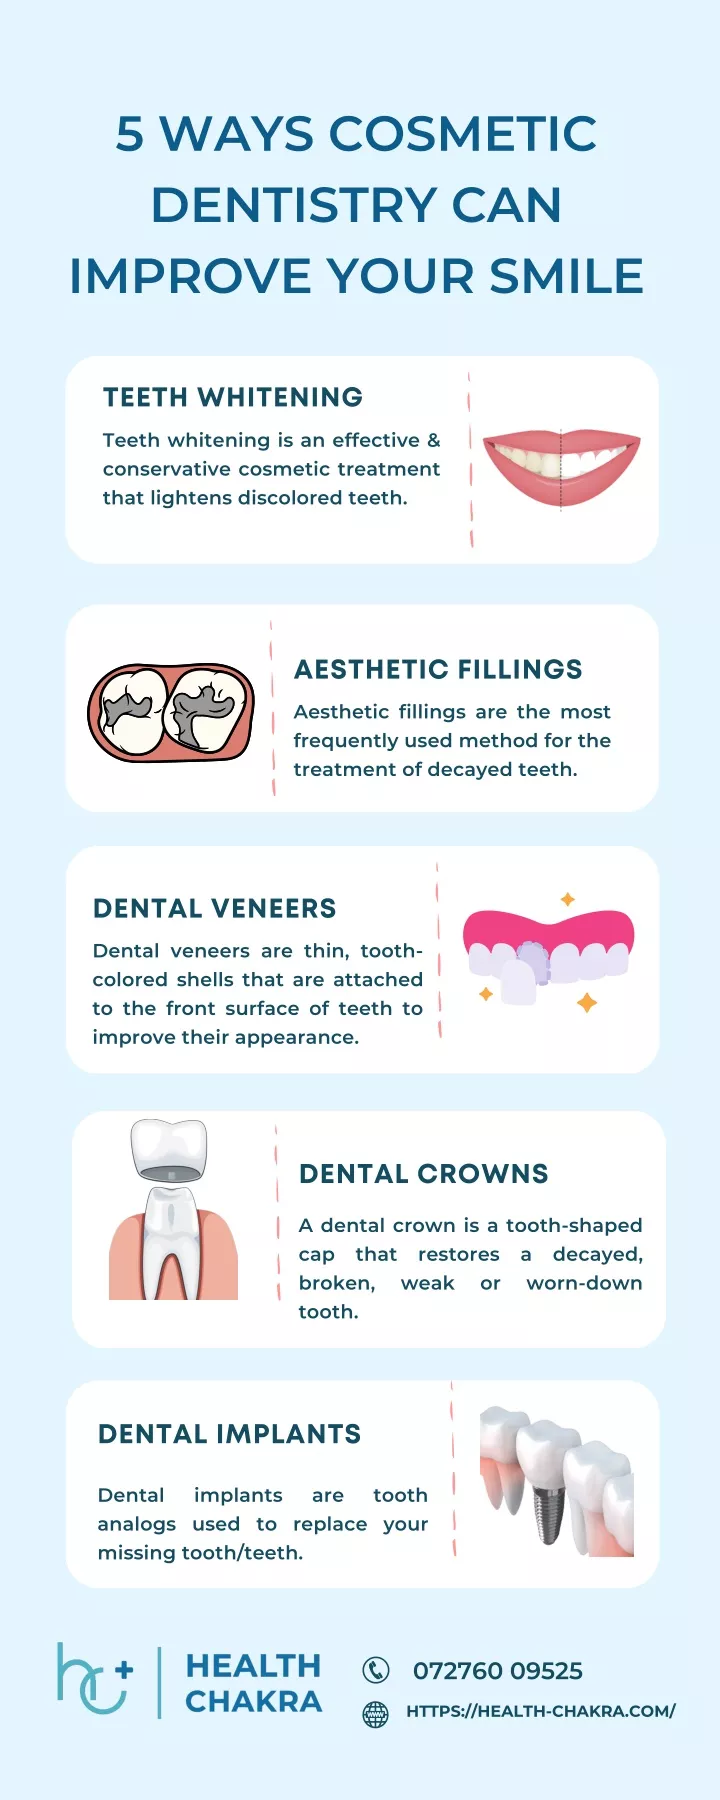 5 ways cosmetic dentistry can improve your smile